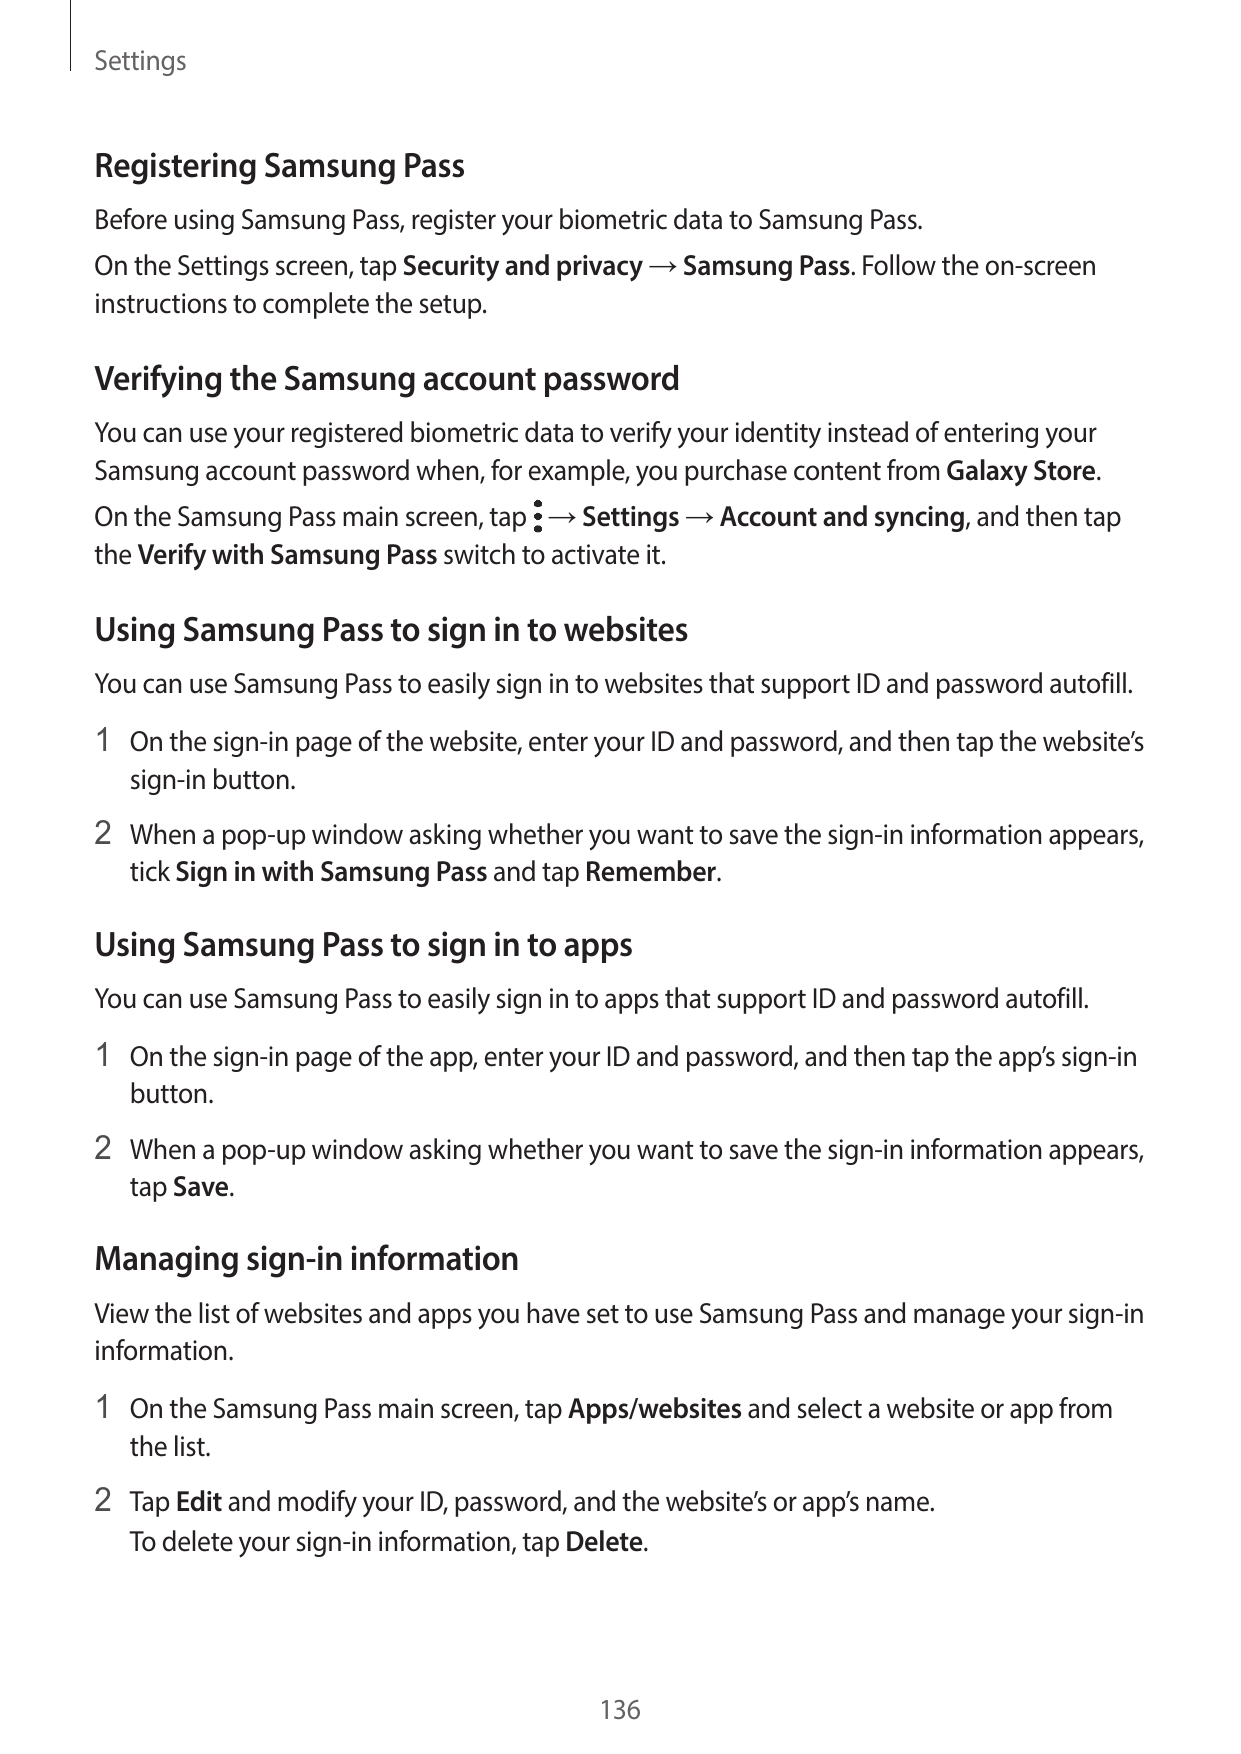 SettingsRegistering Samsung PassBefore using Samsung Pass, register your biometric data to Samsung Pass.On the Settings screen, 